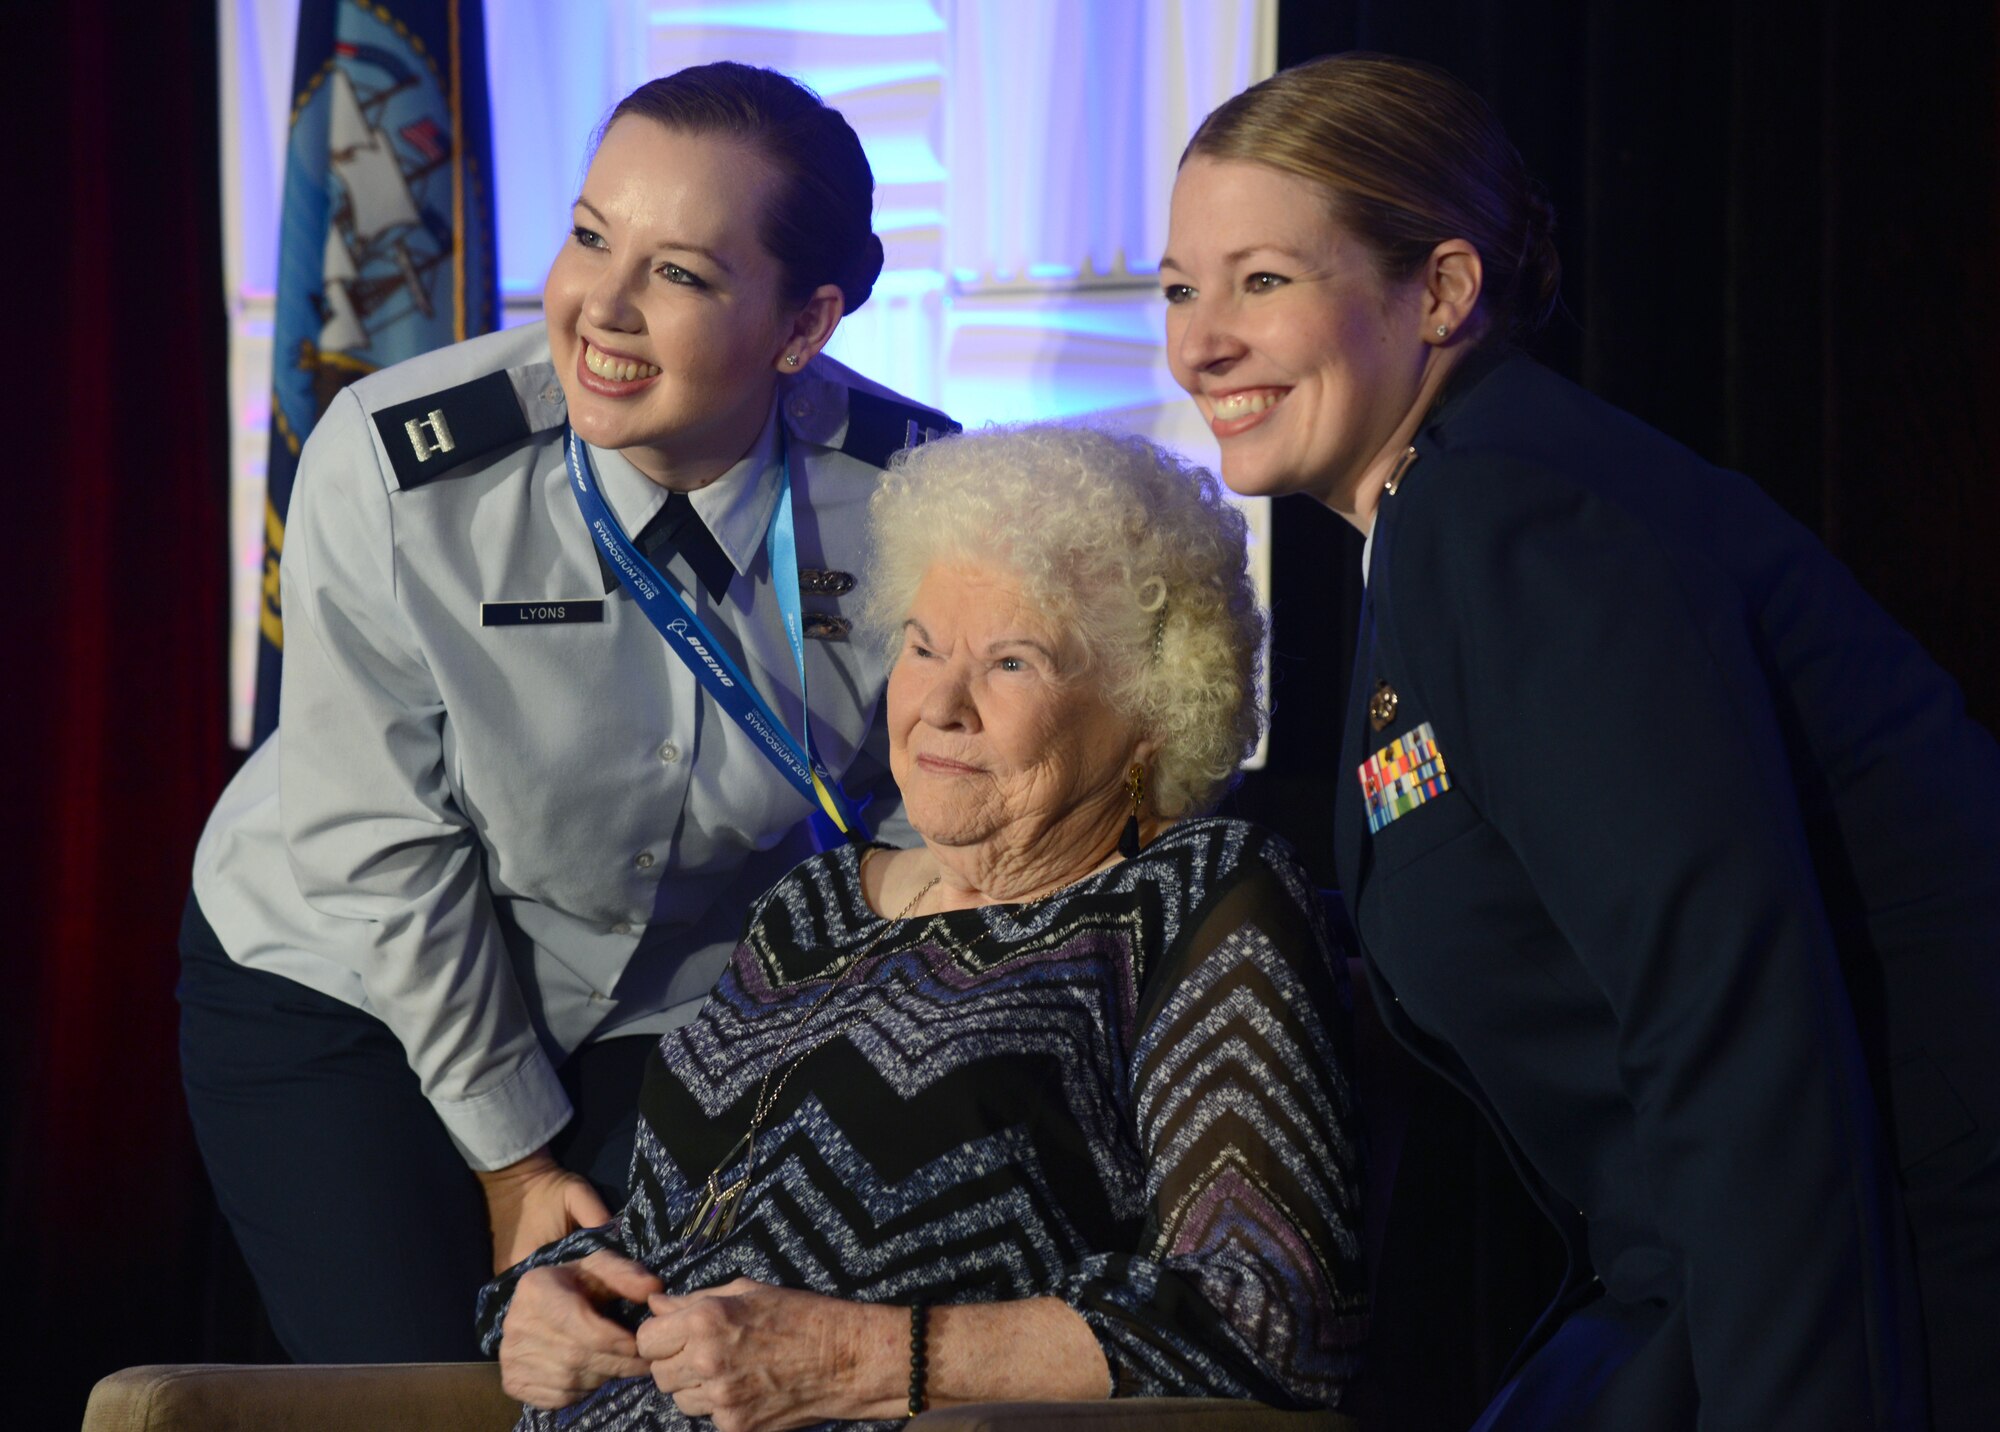 Capt. Rachel Lyons, left, and Capt. Angela Petersen, both from Scott Air Force Base, Illinois, pose with June Buckley, an original Rosie the Riveter, who worked on C-47 Skytrains in the 1940's. Buckley spoke to attendees at the Logistics Officer Association Symposium Oct. 10 about women's defense contributions through history.